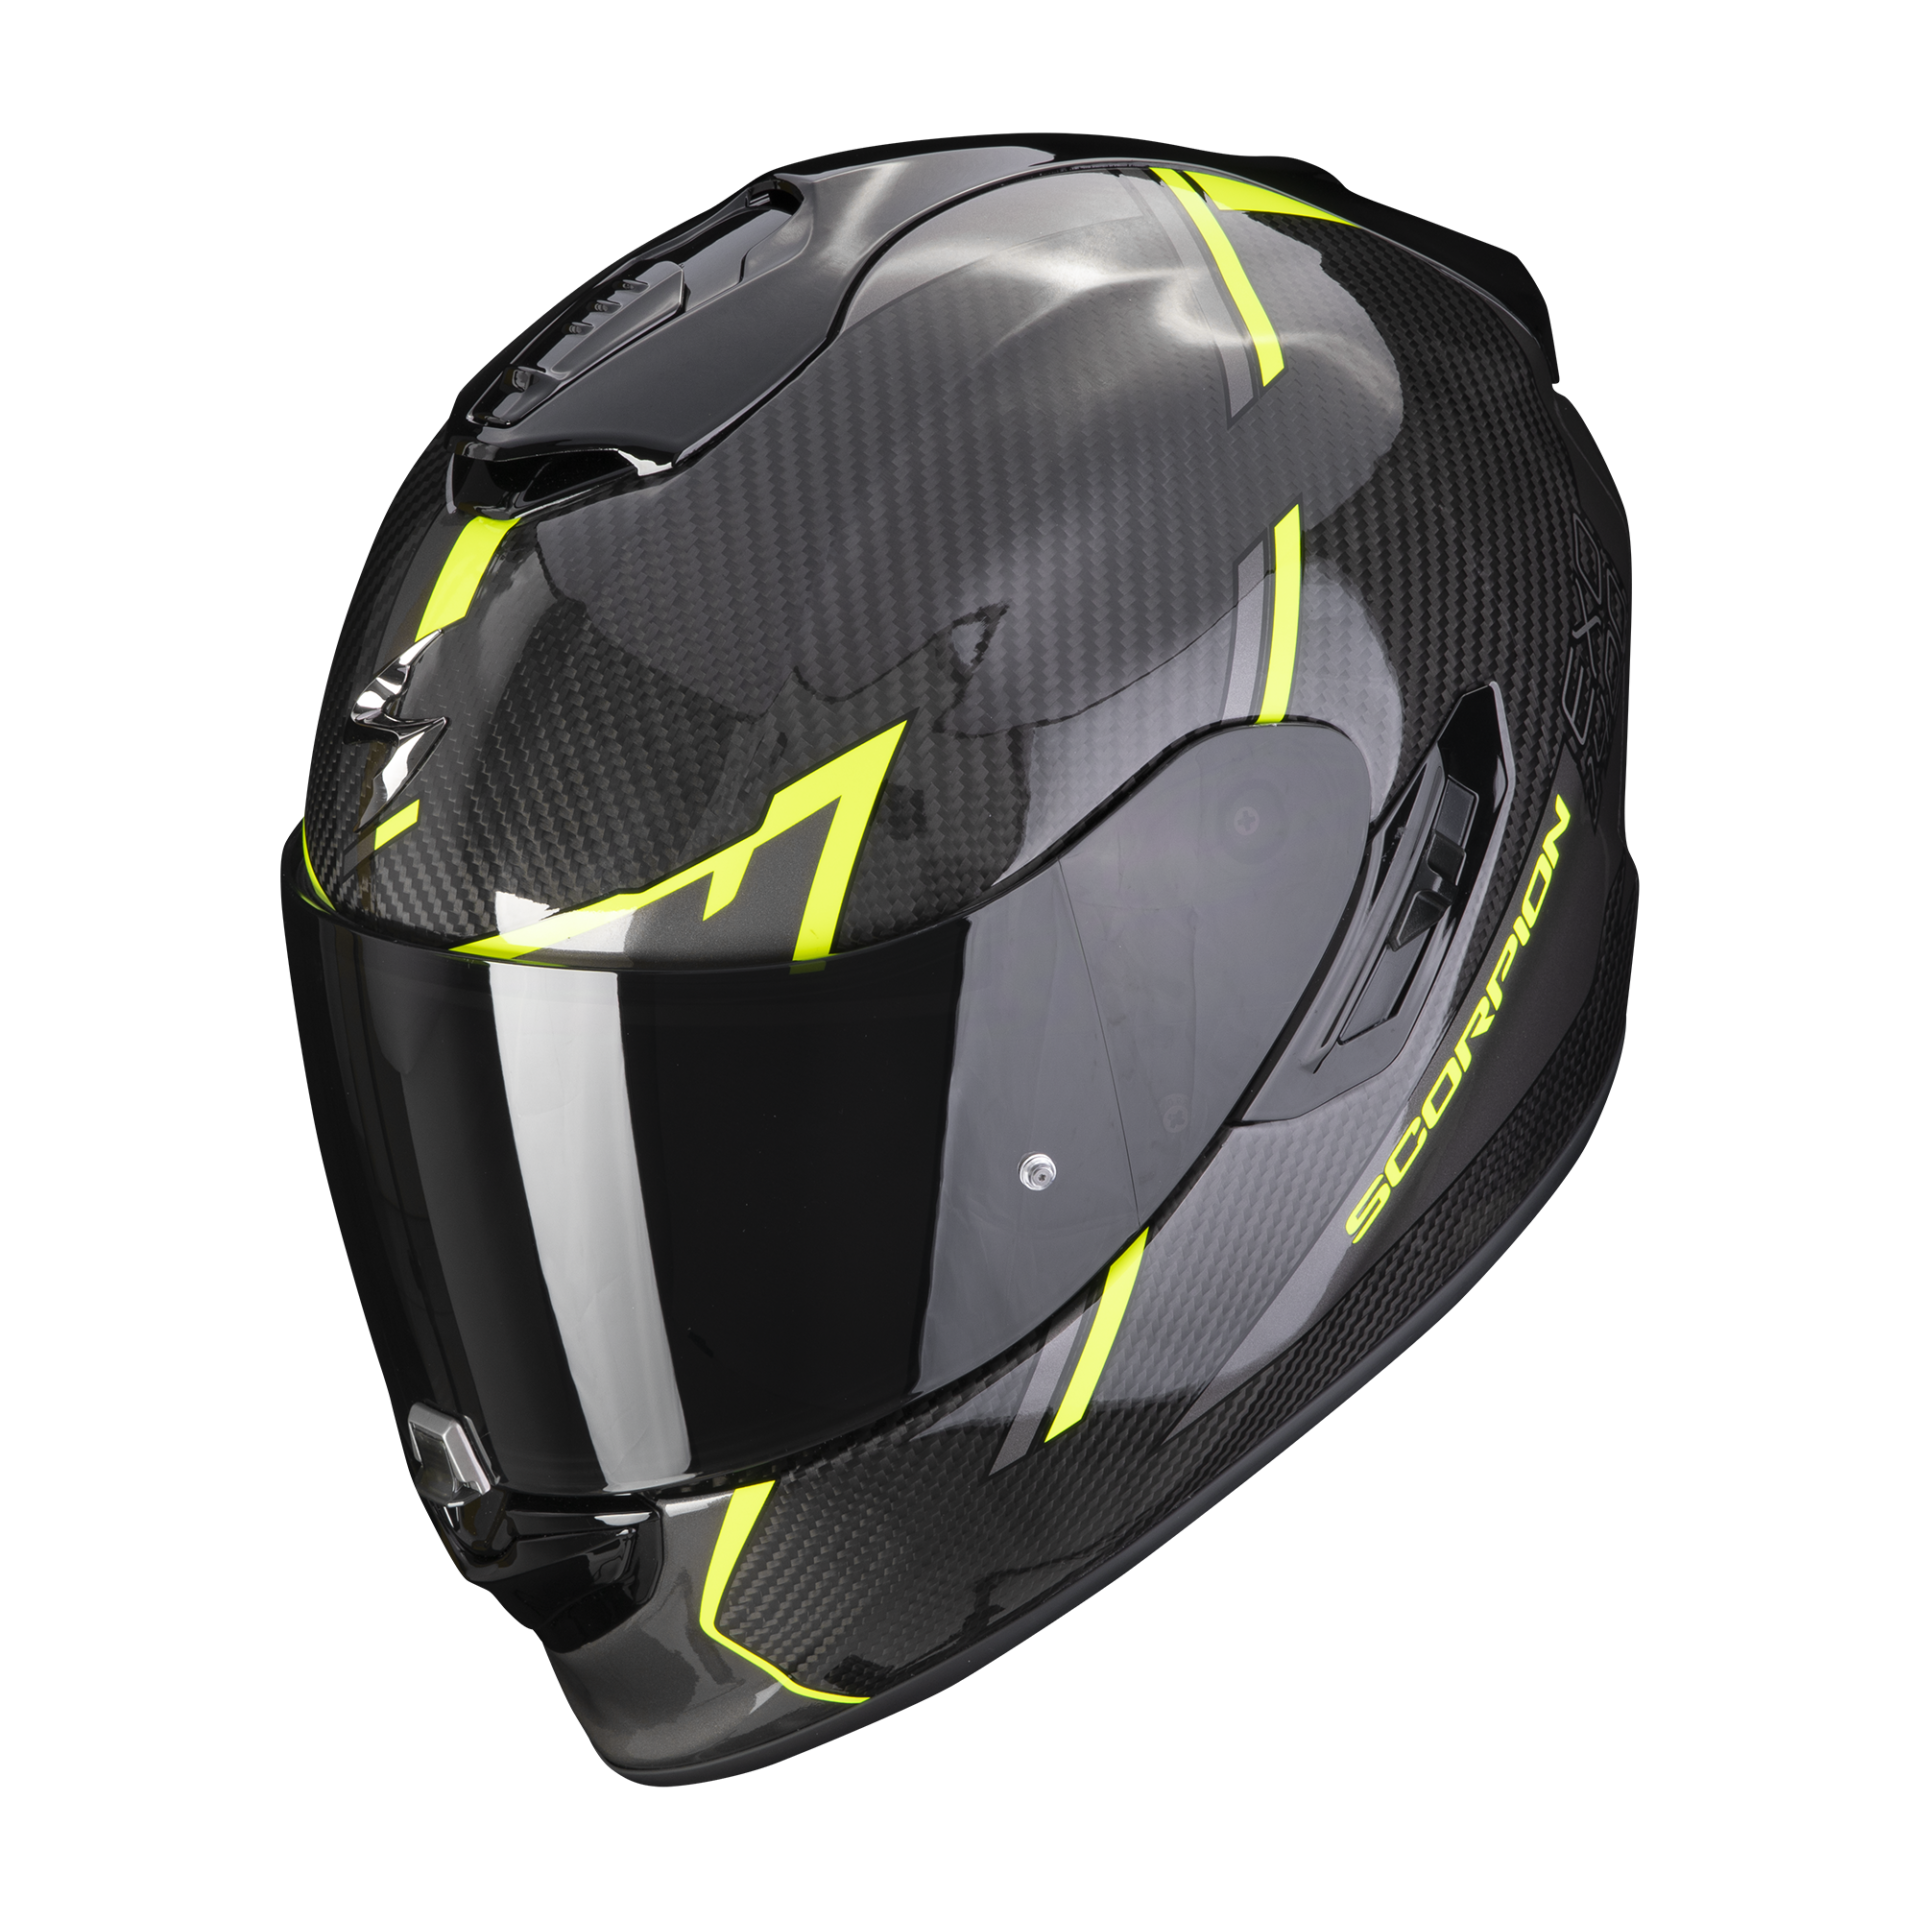 Image of Scorpion Exo-1400 Evo Carbon Air Kendal Black-Neon Yellow Full Face Helmet Size 2XL ID 3399990102472